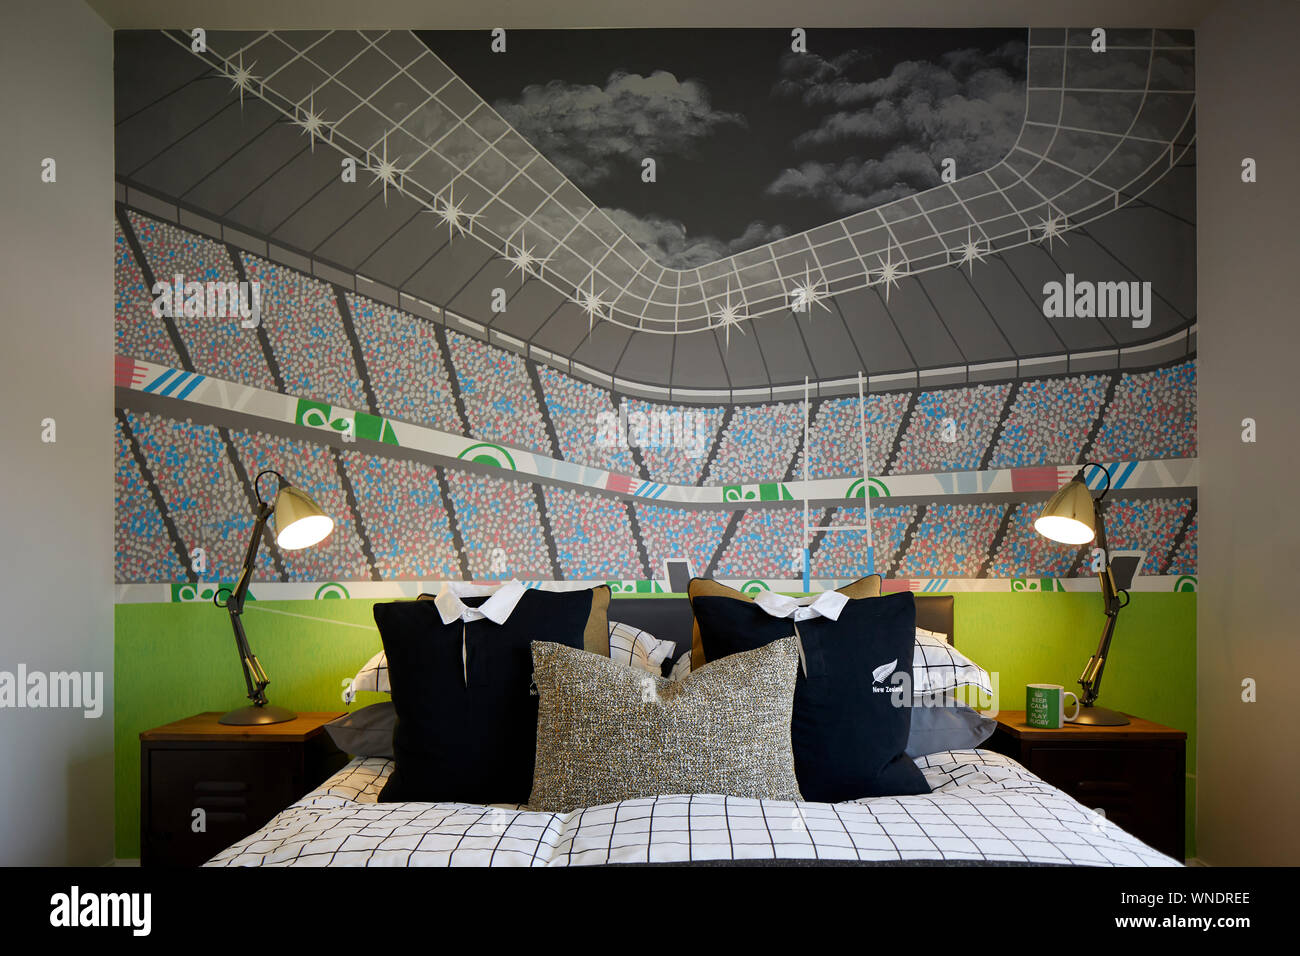 A Boys Bedroom With Stadium Mural Hand Painted With Rugby Pillow Made From Shirts Stock Photo Alamy